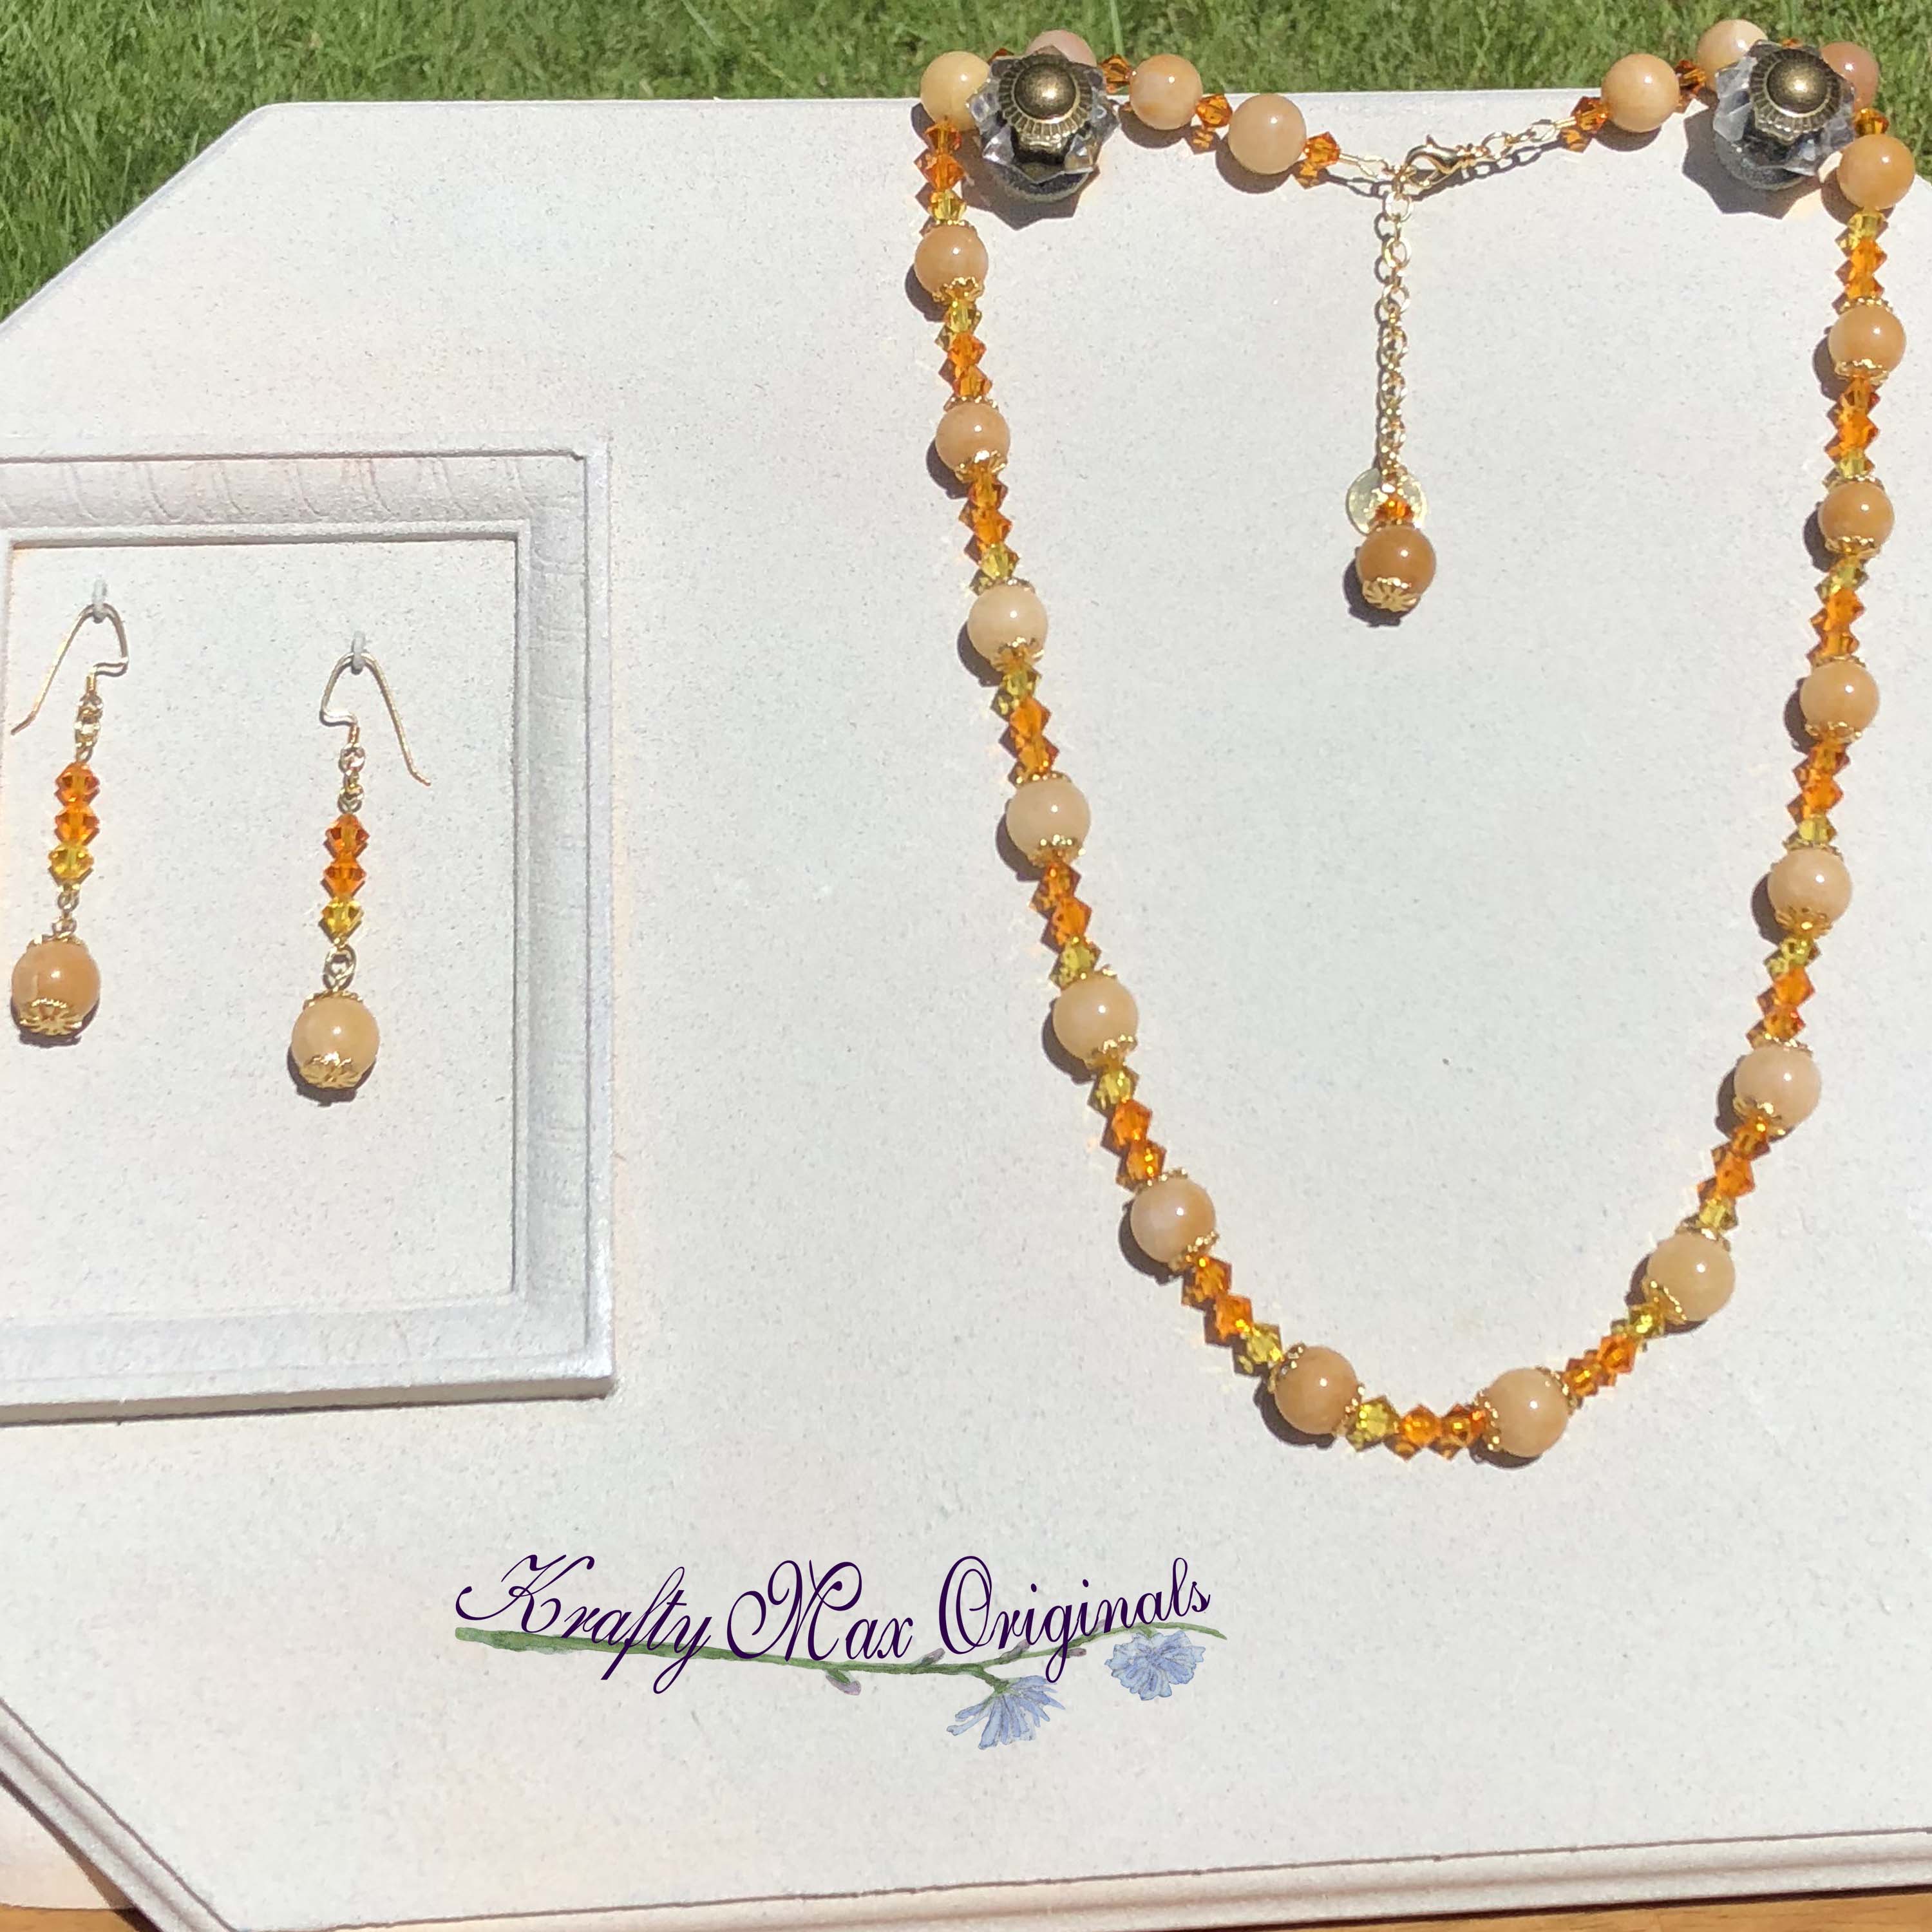 Amber crystals necklace and earrings set